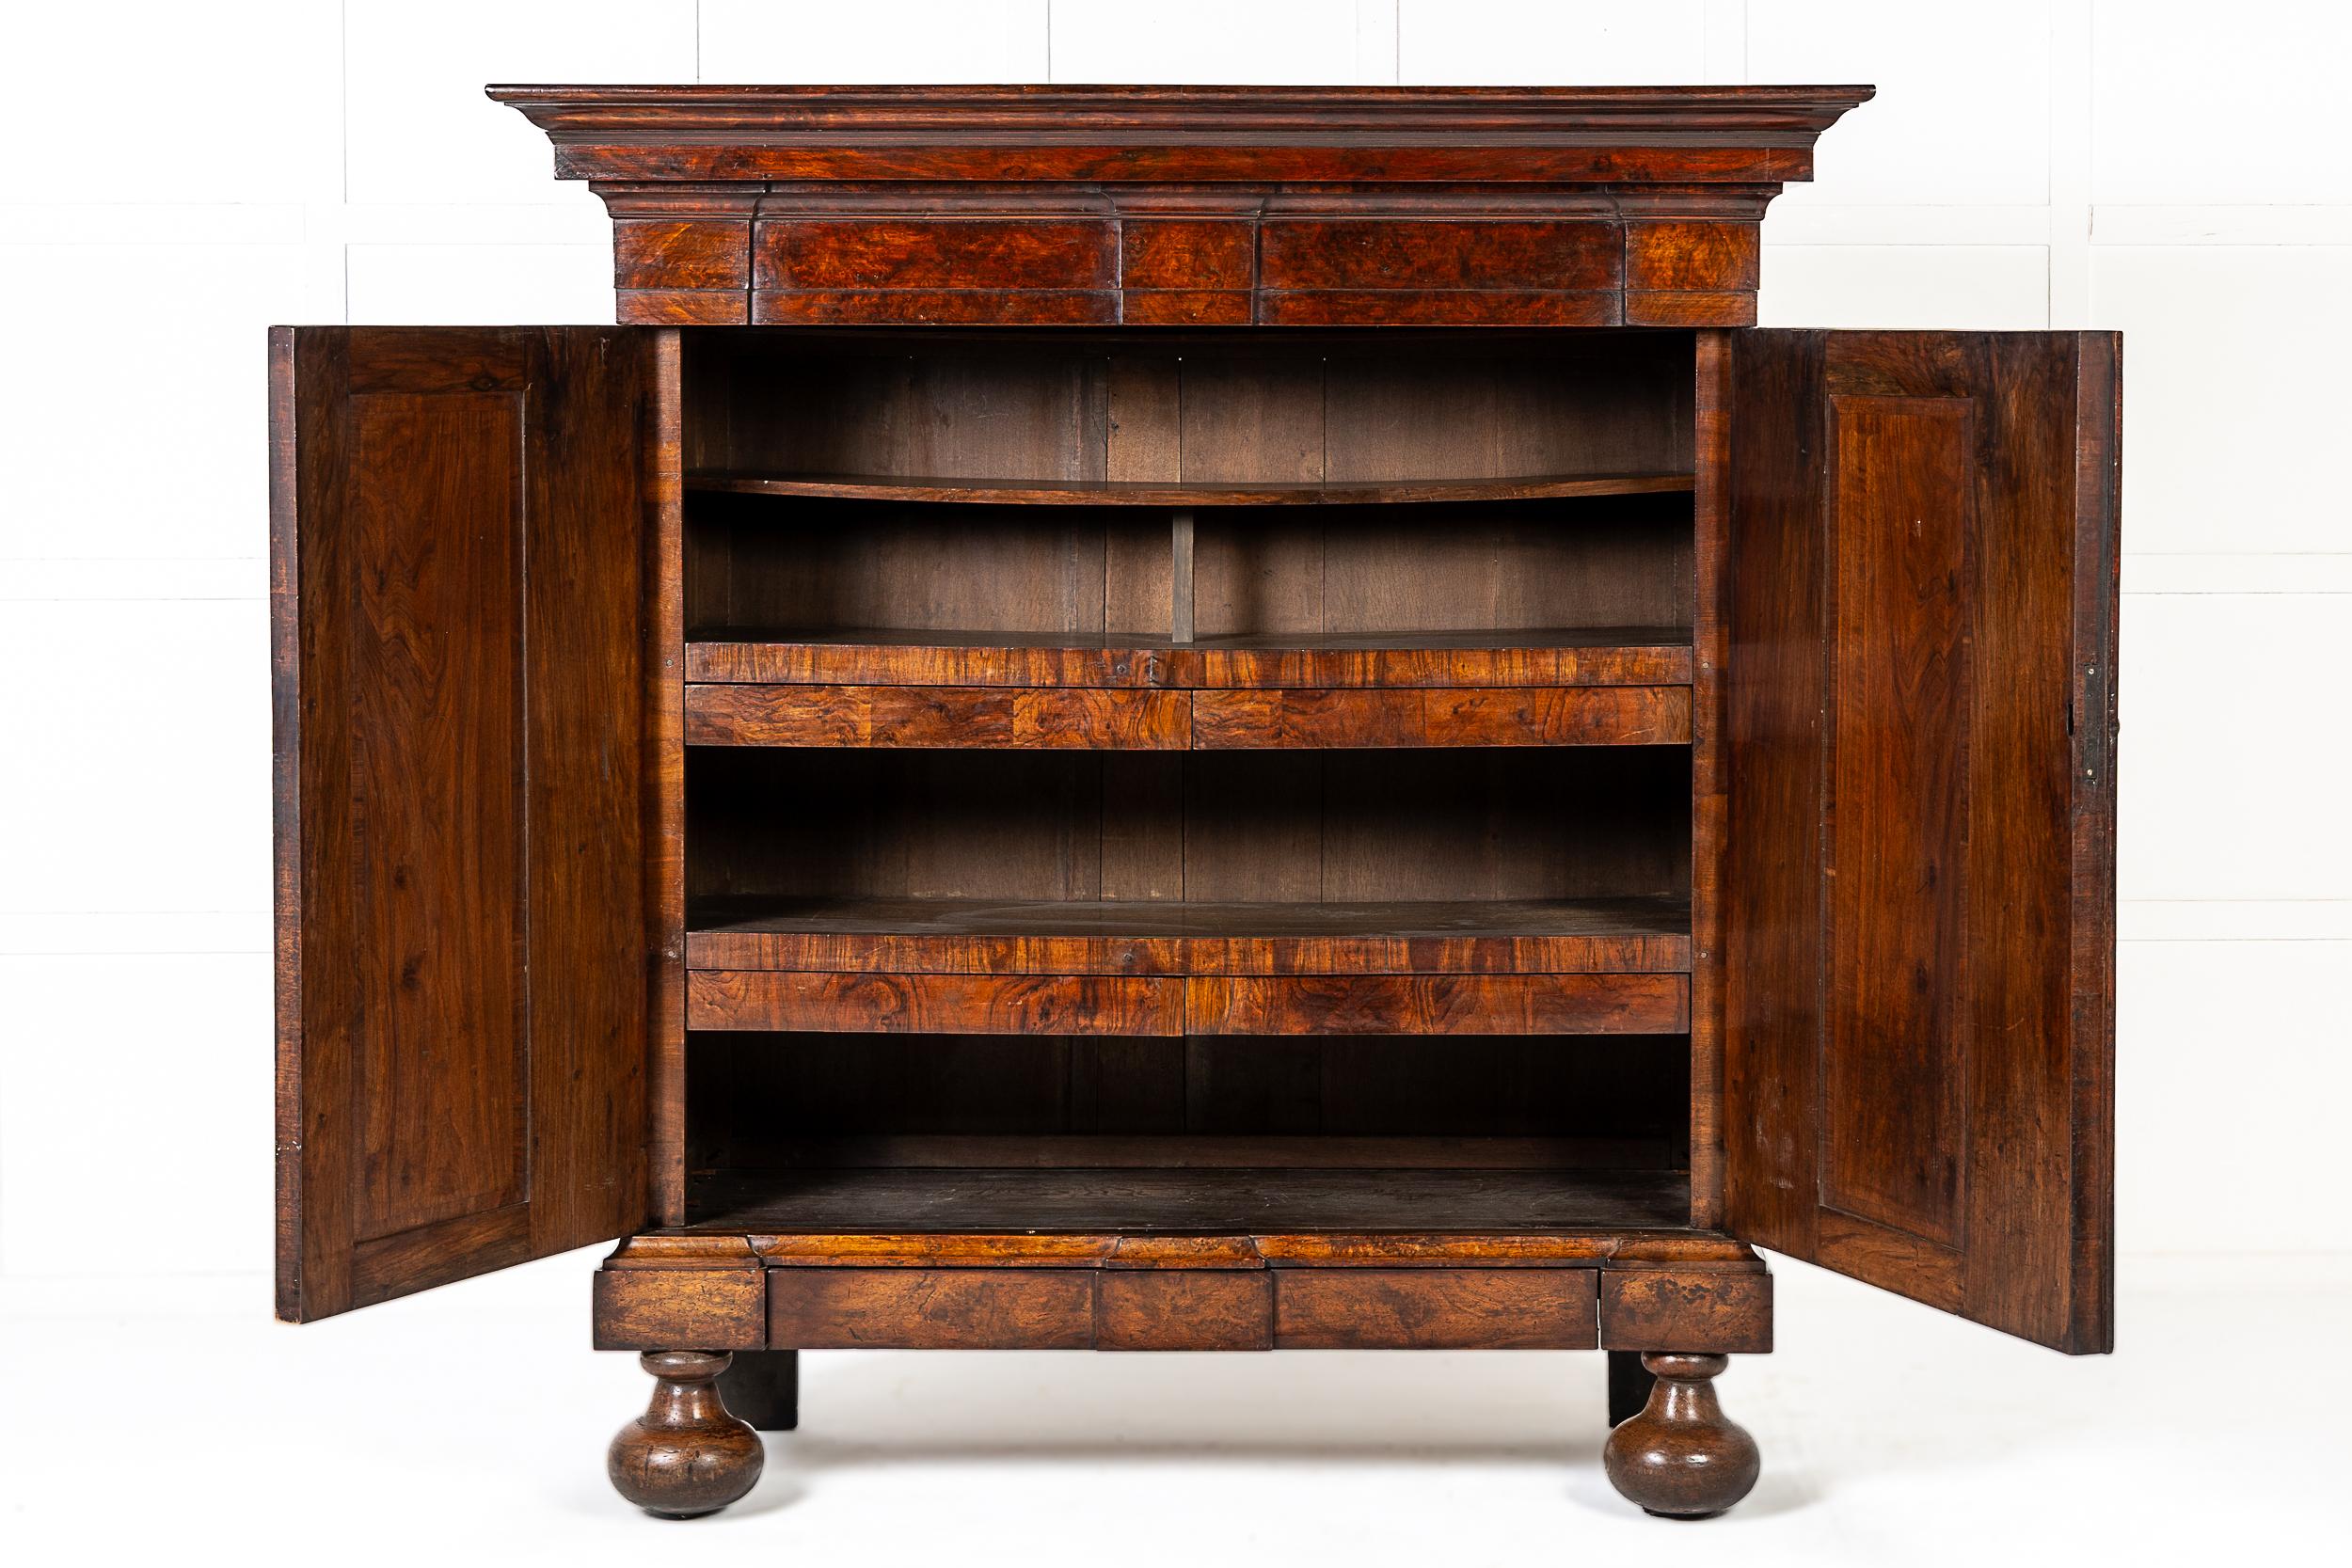 A Fine 18th Century Dutch Cabinet of Architectural Form in Finely Figured Burr Walnut.

This finely-proportioned piece is very architectural in style and features an overhanging pediment above a pair of panelled doors, veneered throughout in burr